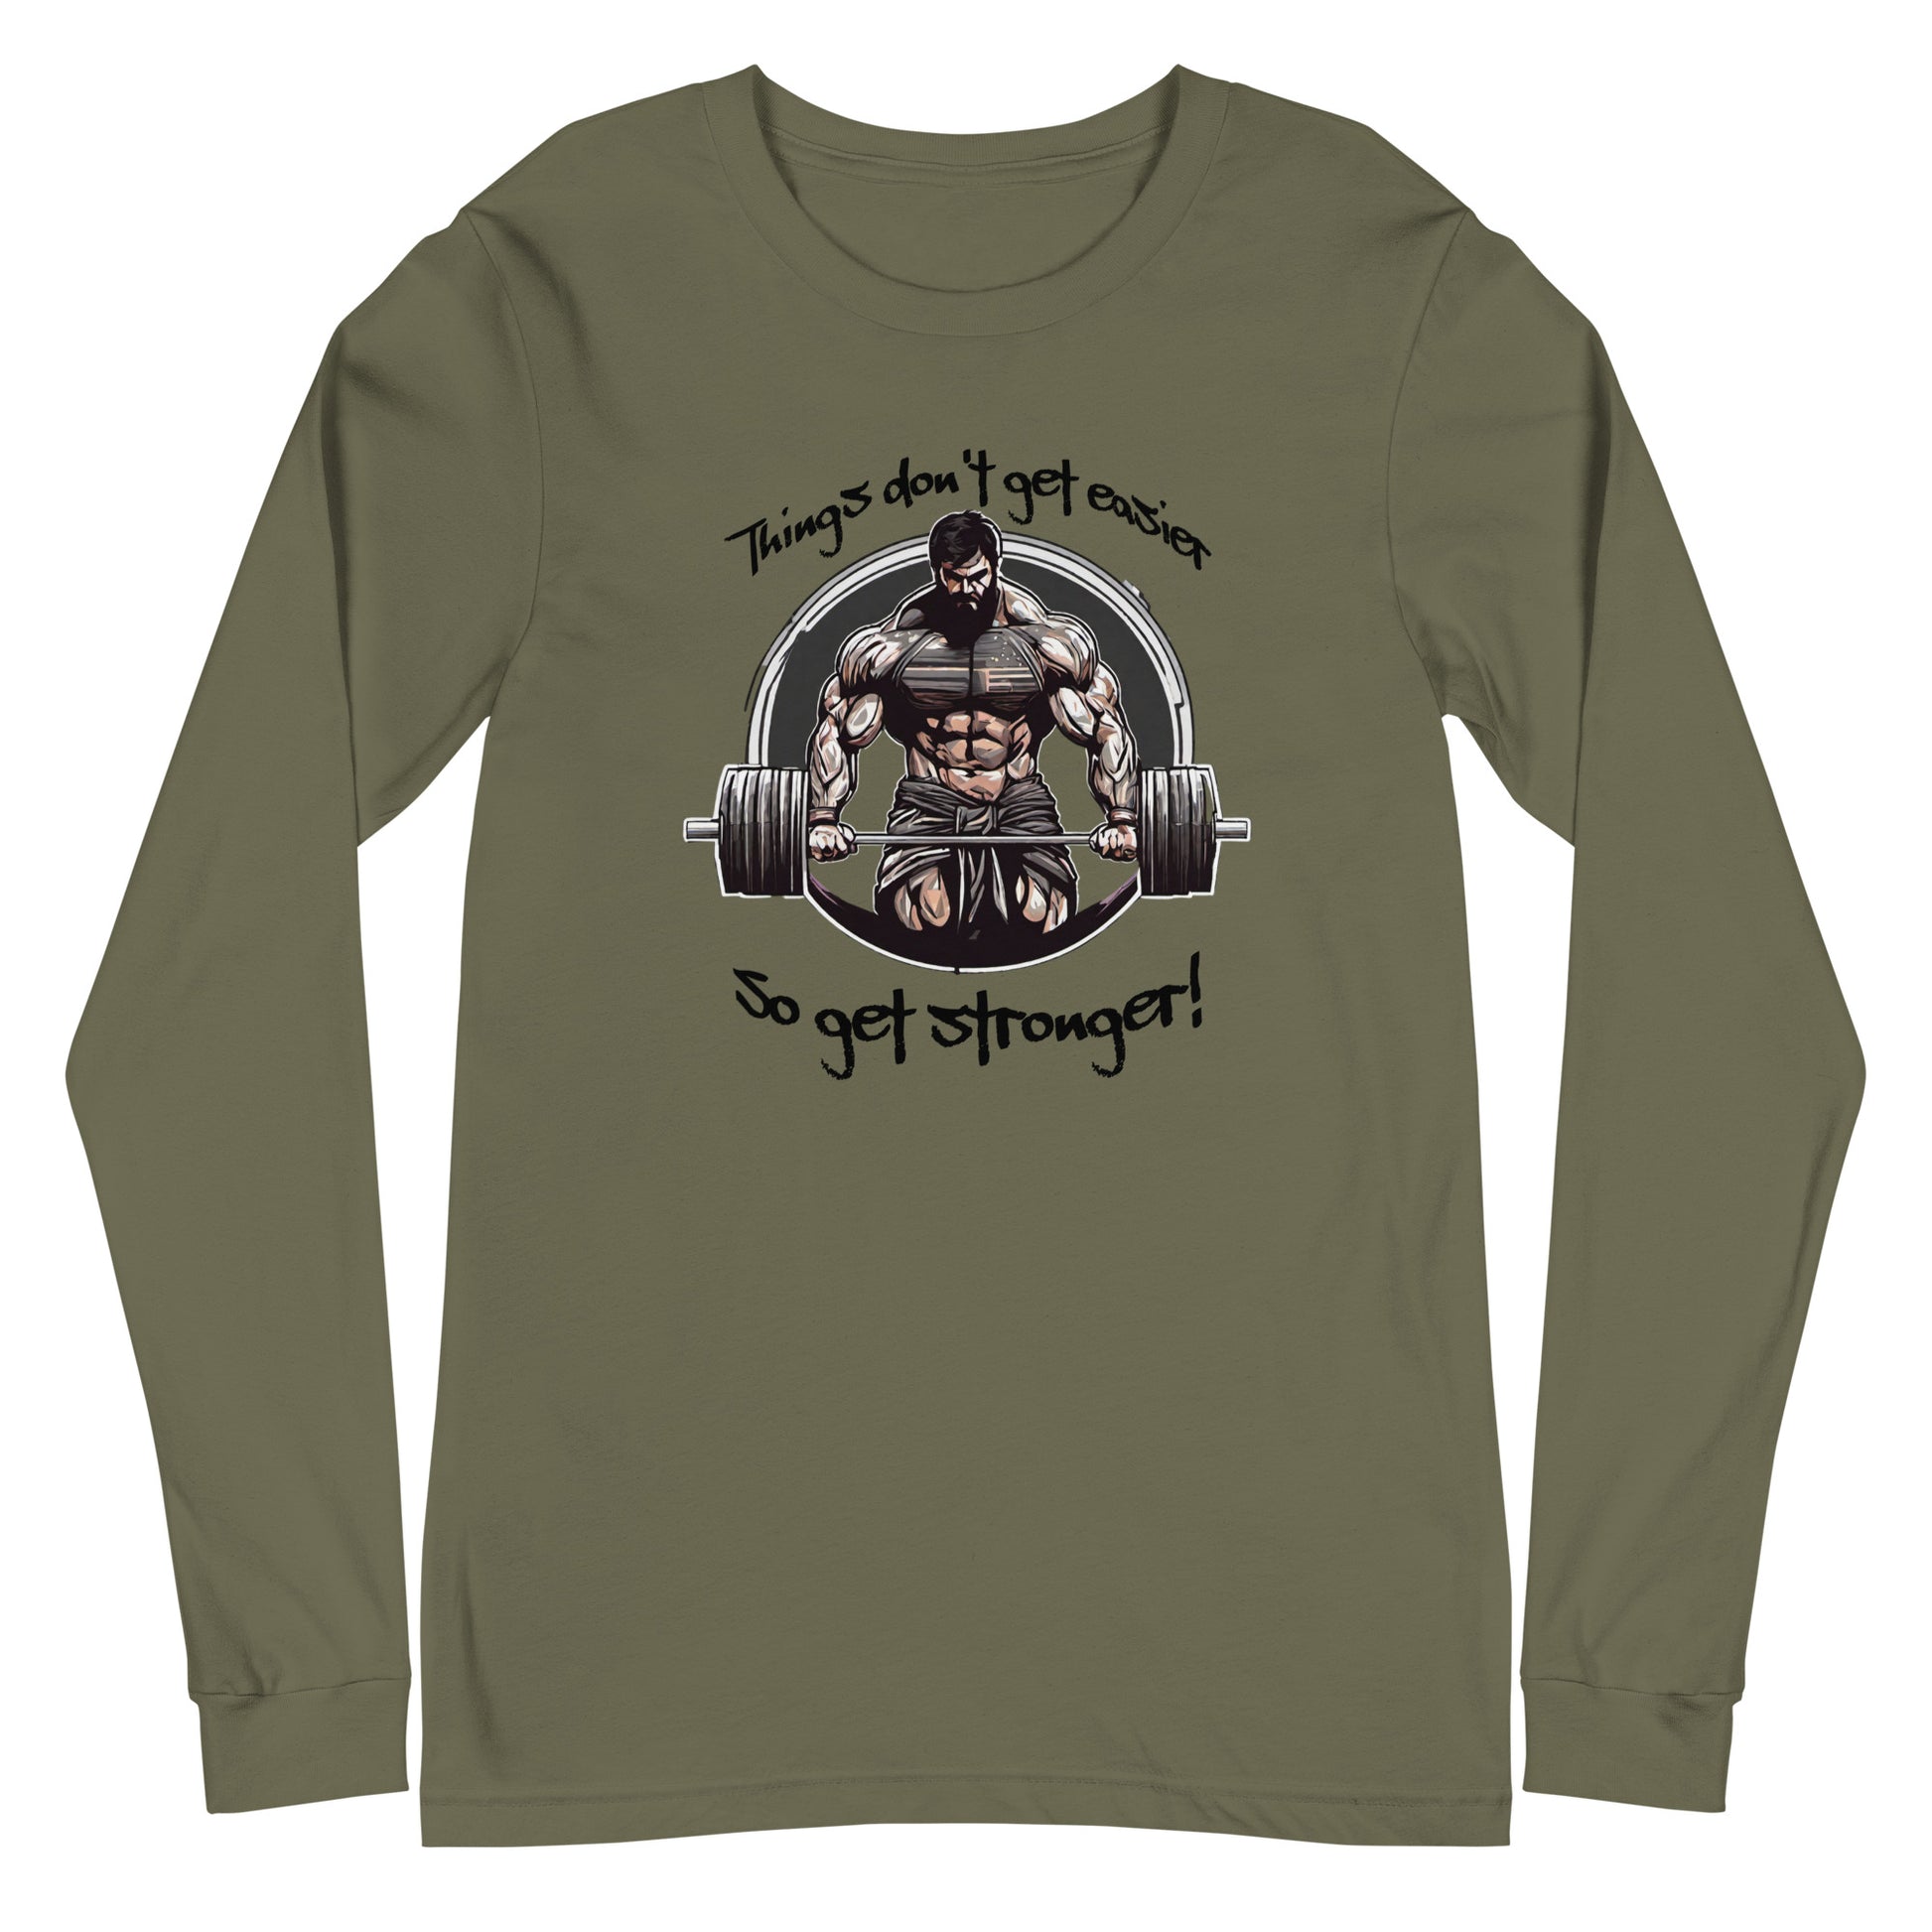 Life's Hard, Get Strong Men's Long Sleeve Tee Military Green